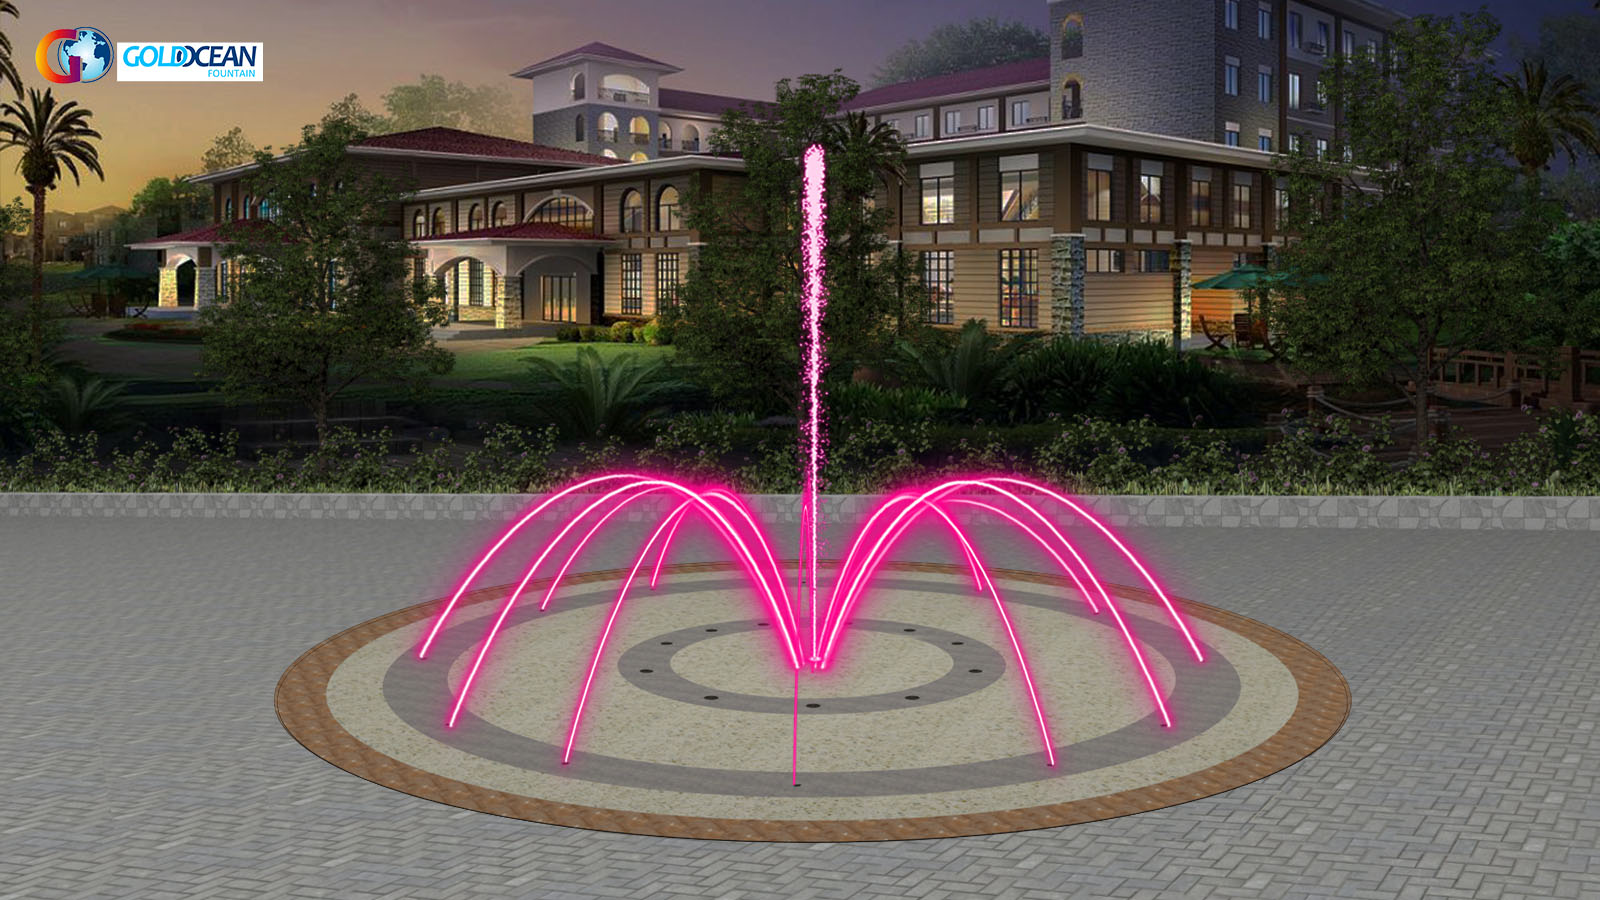 FREE DESIGN Customized Outdoor Jumping Jets Fountain